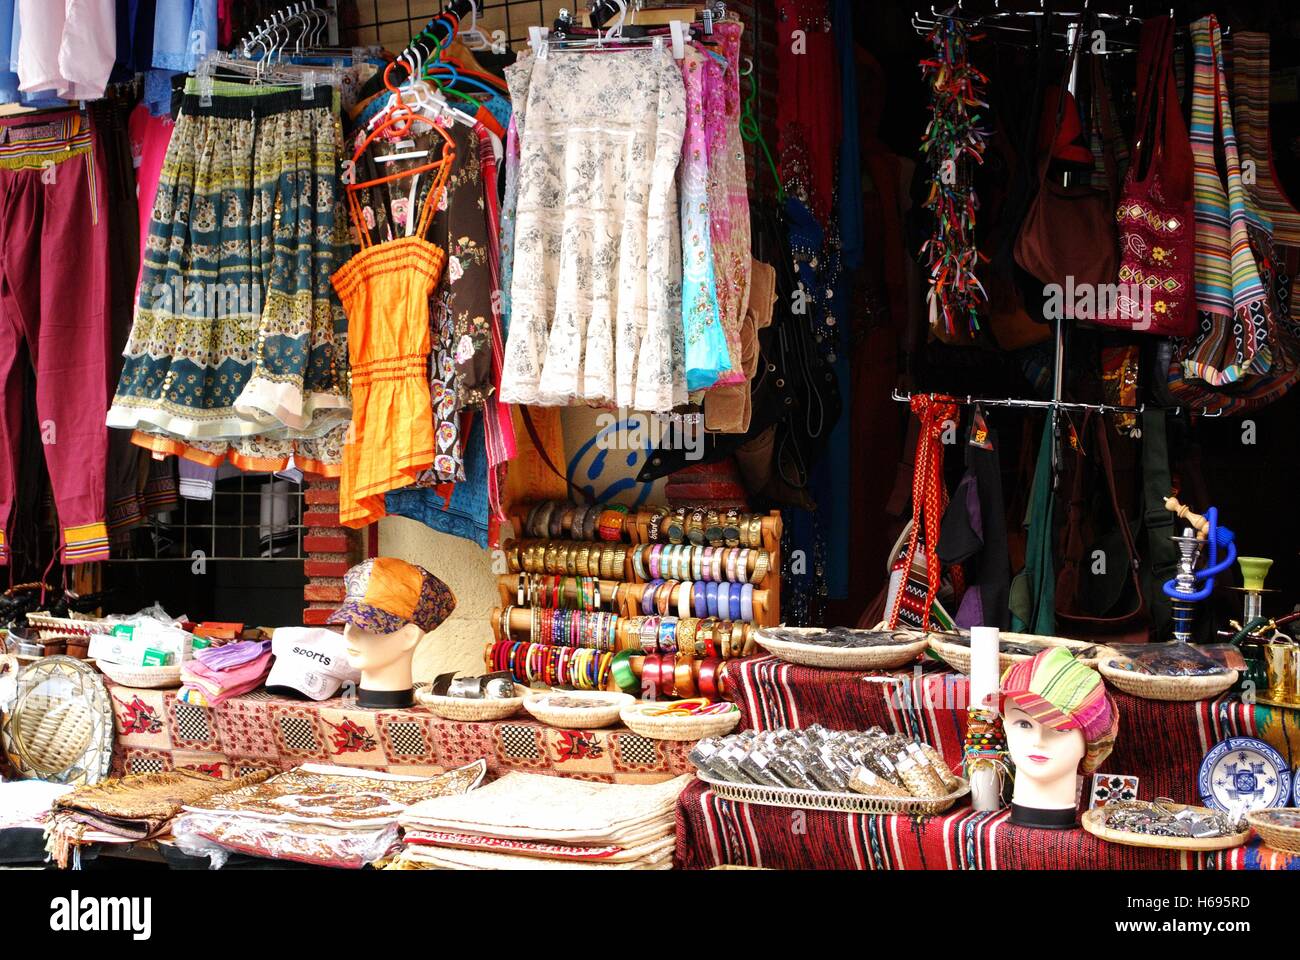 Clothes and accessories stall in a side street off the Plaza Nueva, Granada, Granada Province, Andalusia, Spain, Western Europe. Stock Photo